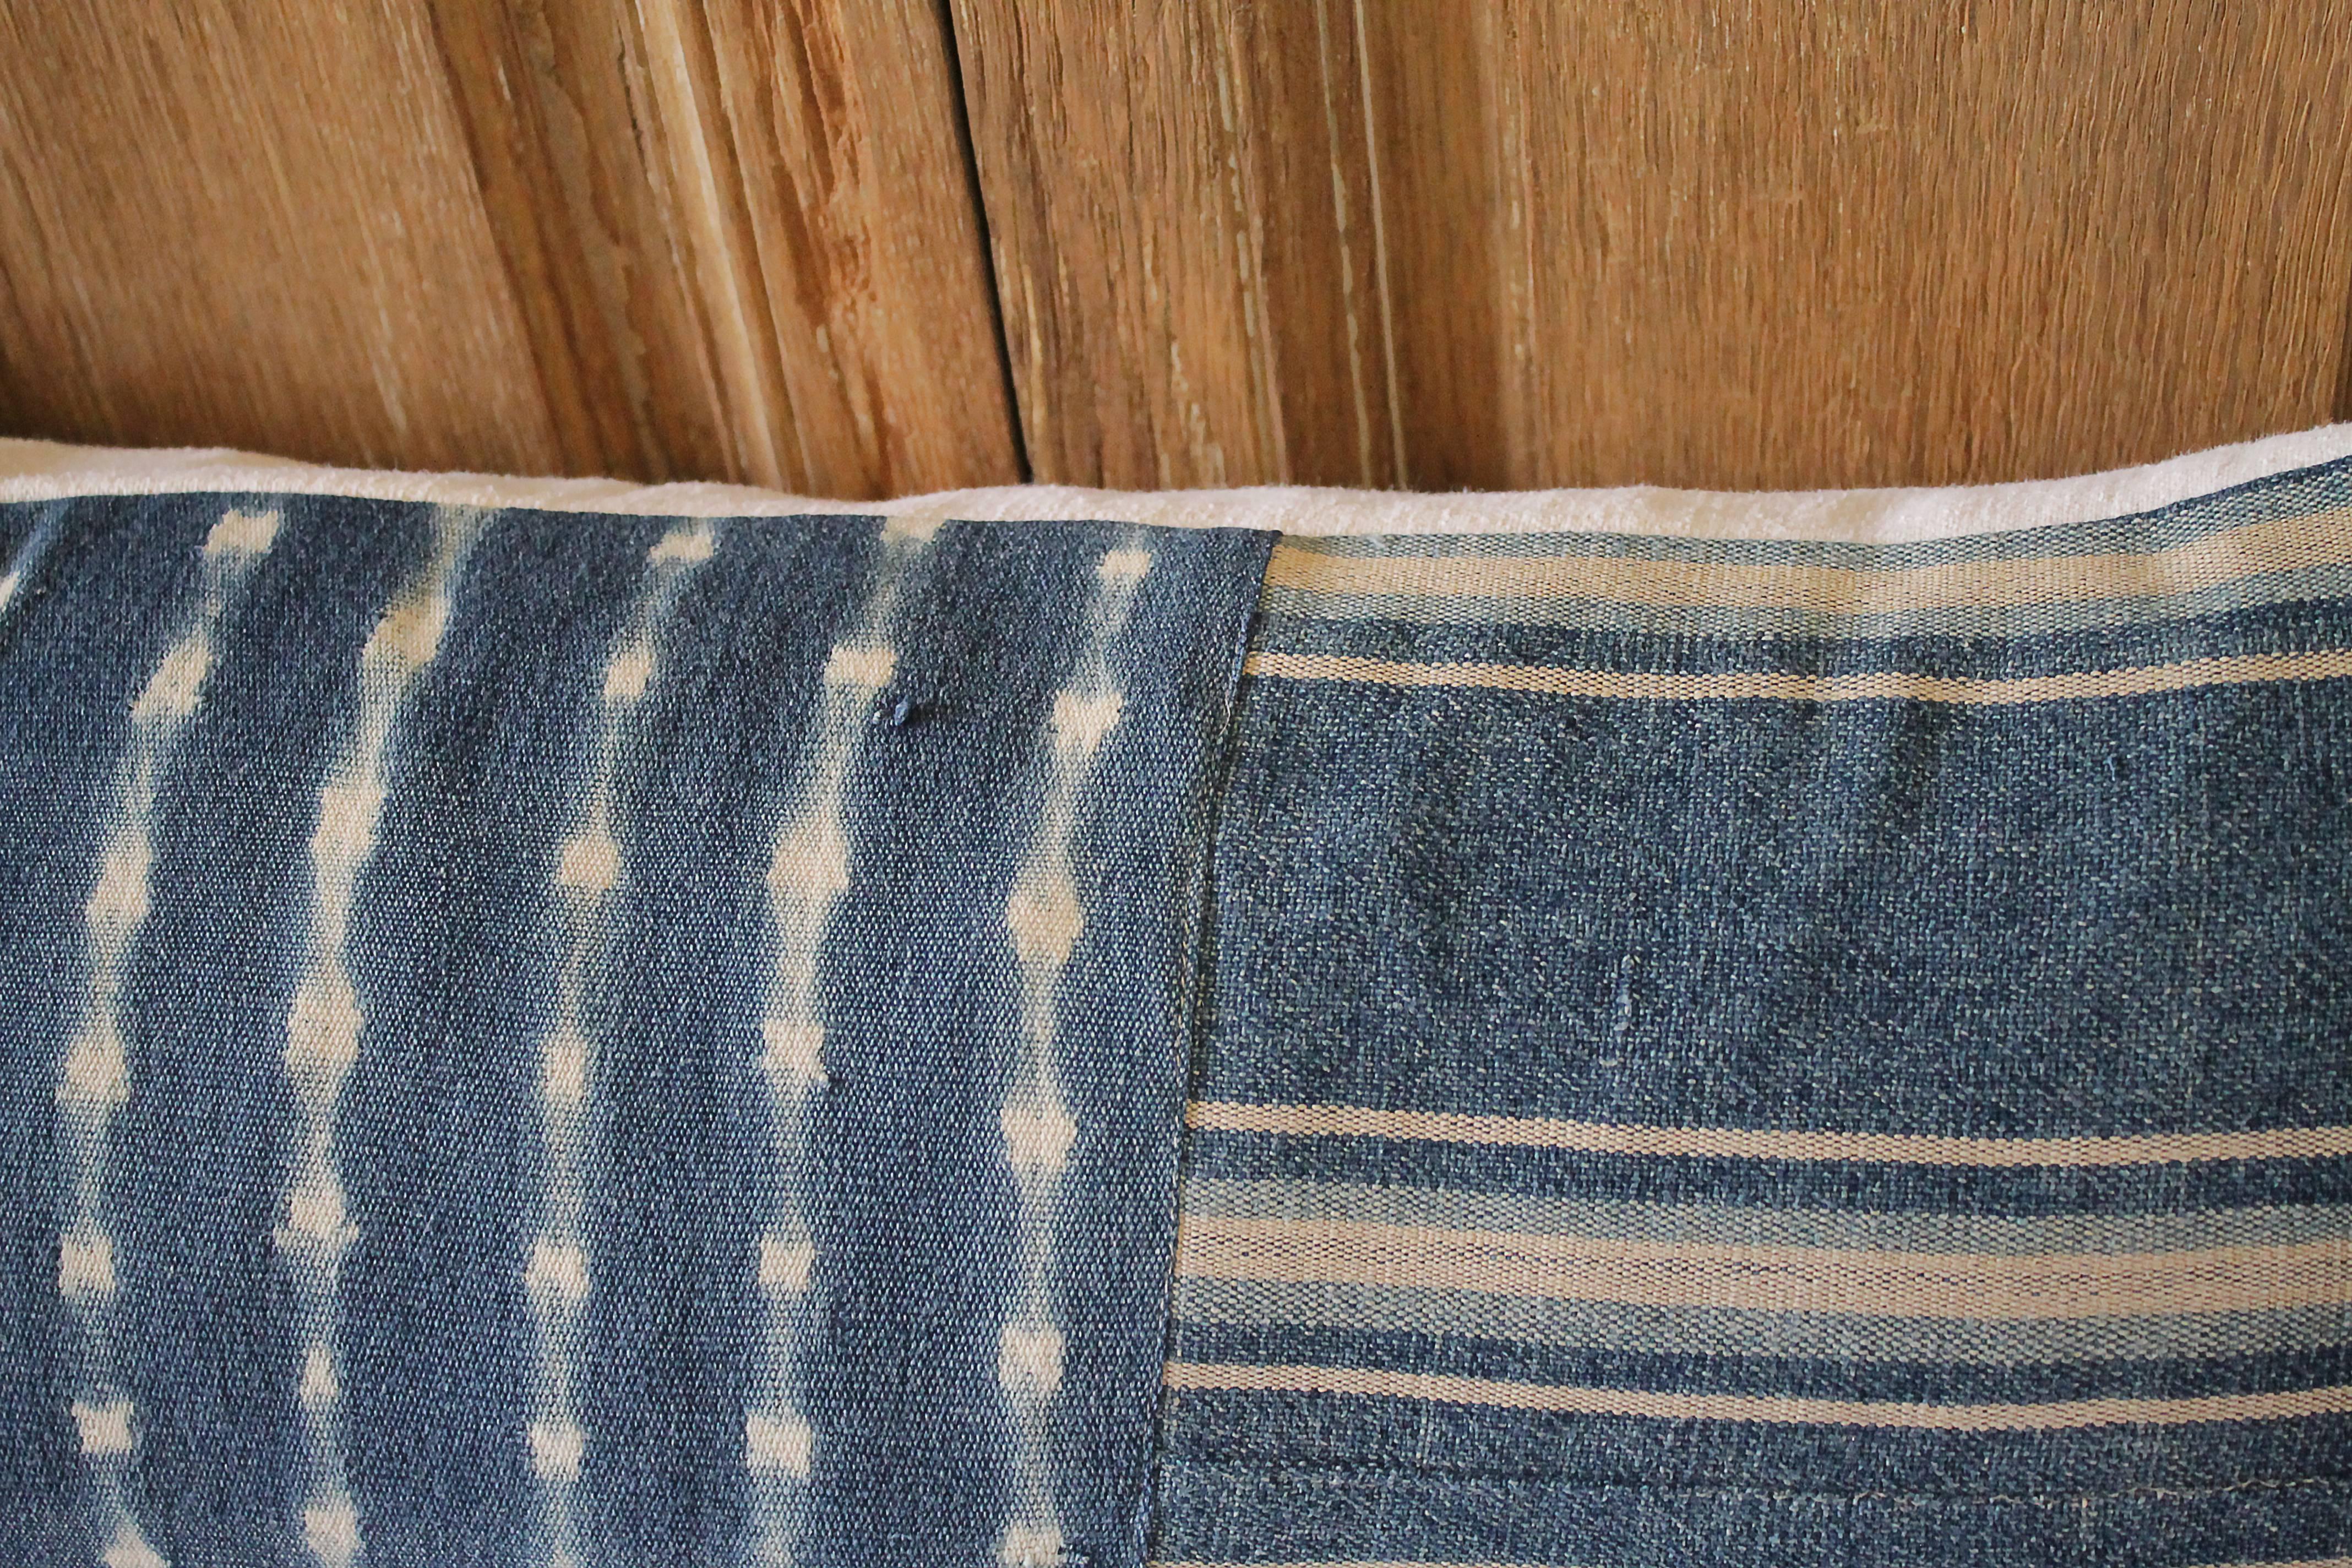 Custom pillow made from antique textiles by Full Bloom Cottage. Antique indigo blue Batik lumbar pillow with down insert and hidden zipper closure. Back side of the pillow is finished in an antique French linen in natural.
Measures 13 x 30.